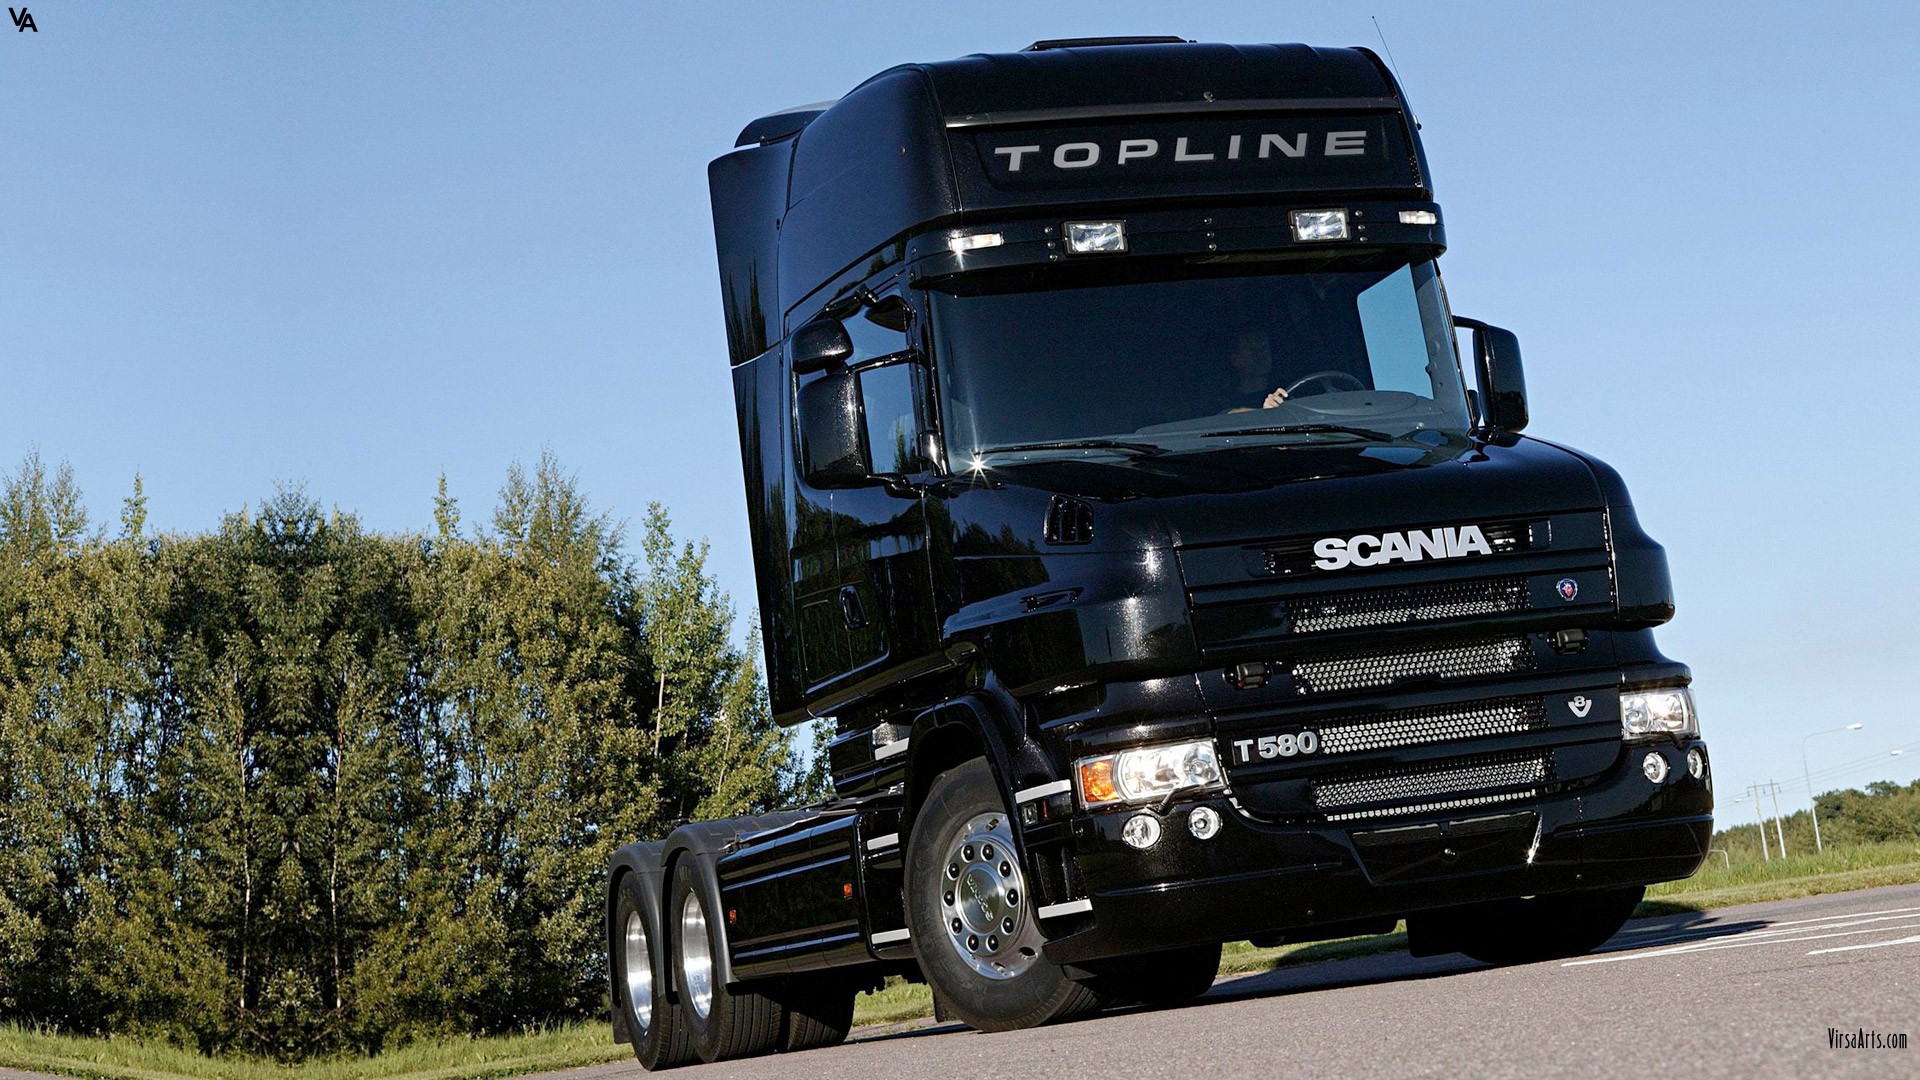 Vehicles Scania HD Wallpaper | Background Image